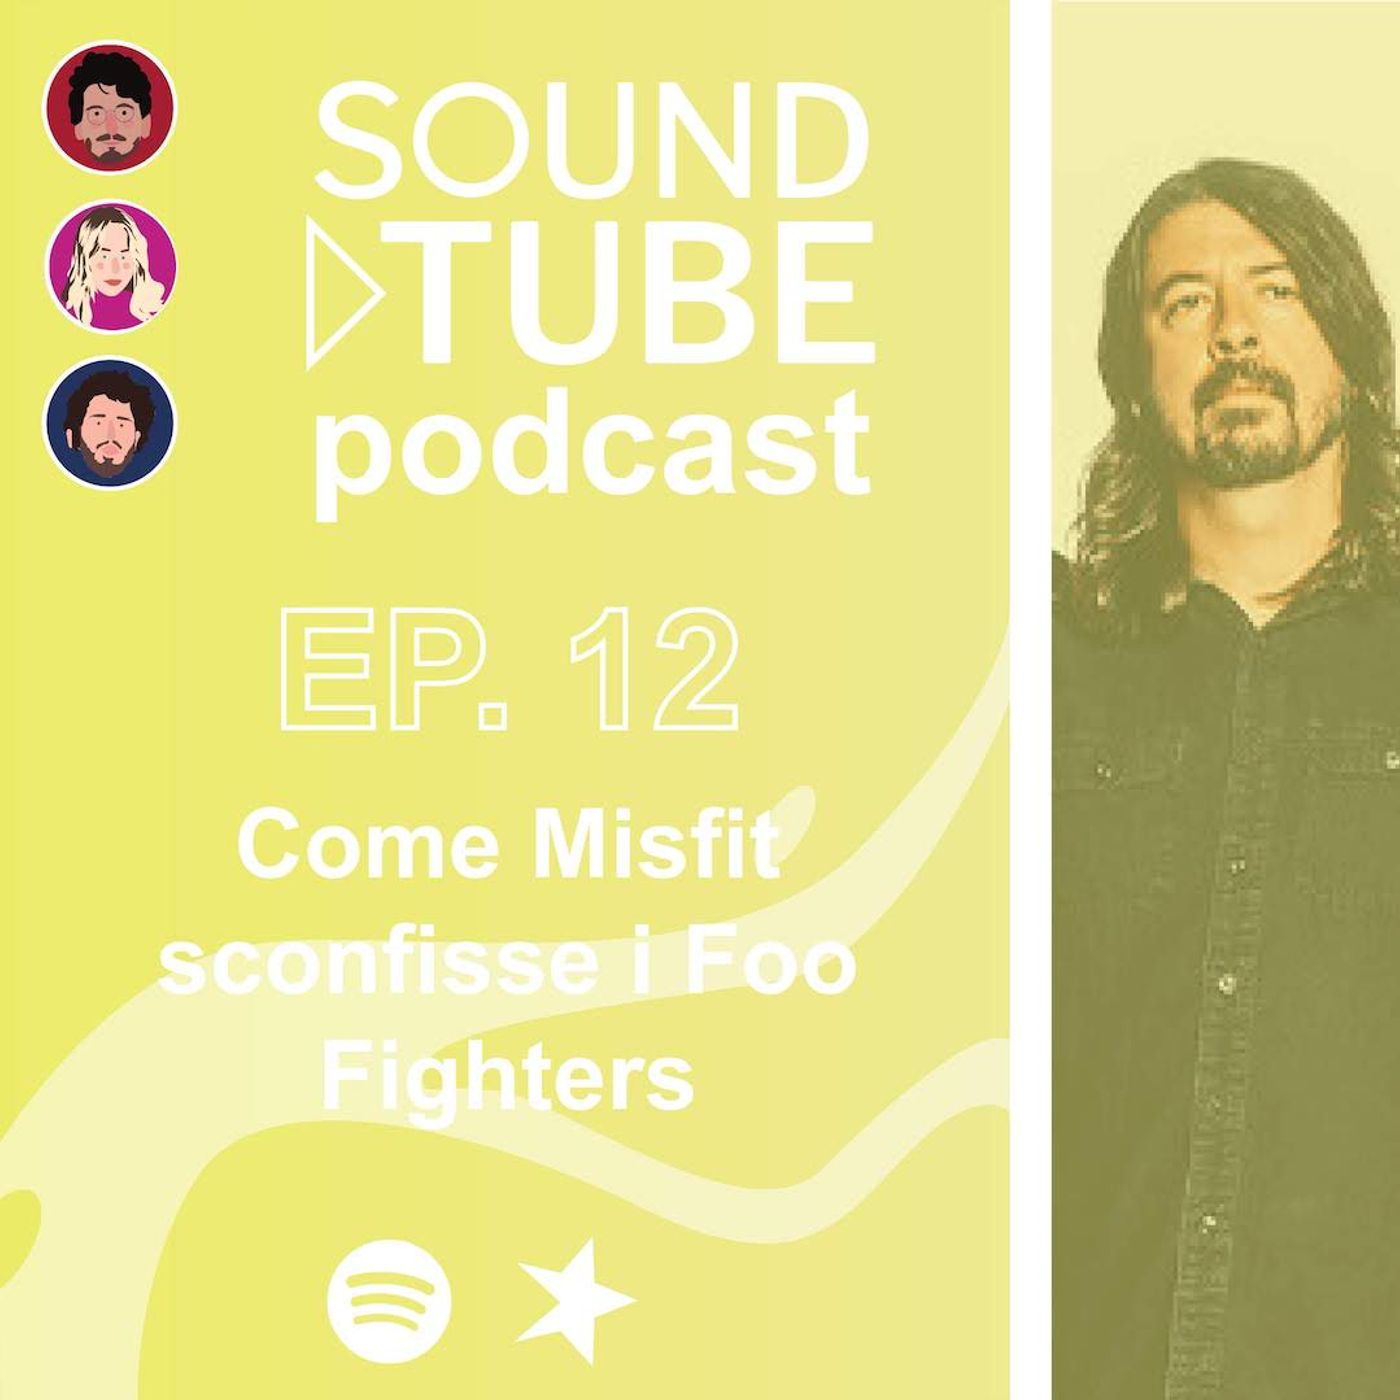 Come Misfit sconfisse i Foo Fighters - ep 12 domenica 31/5